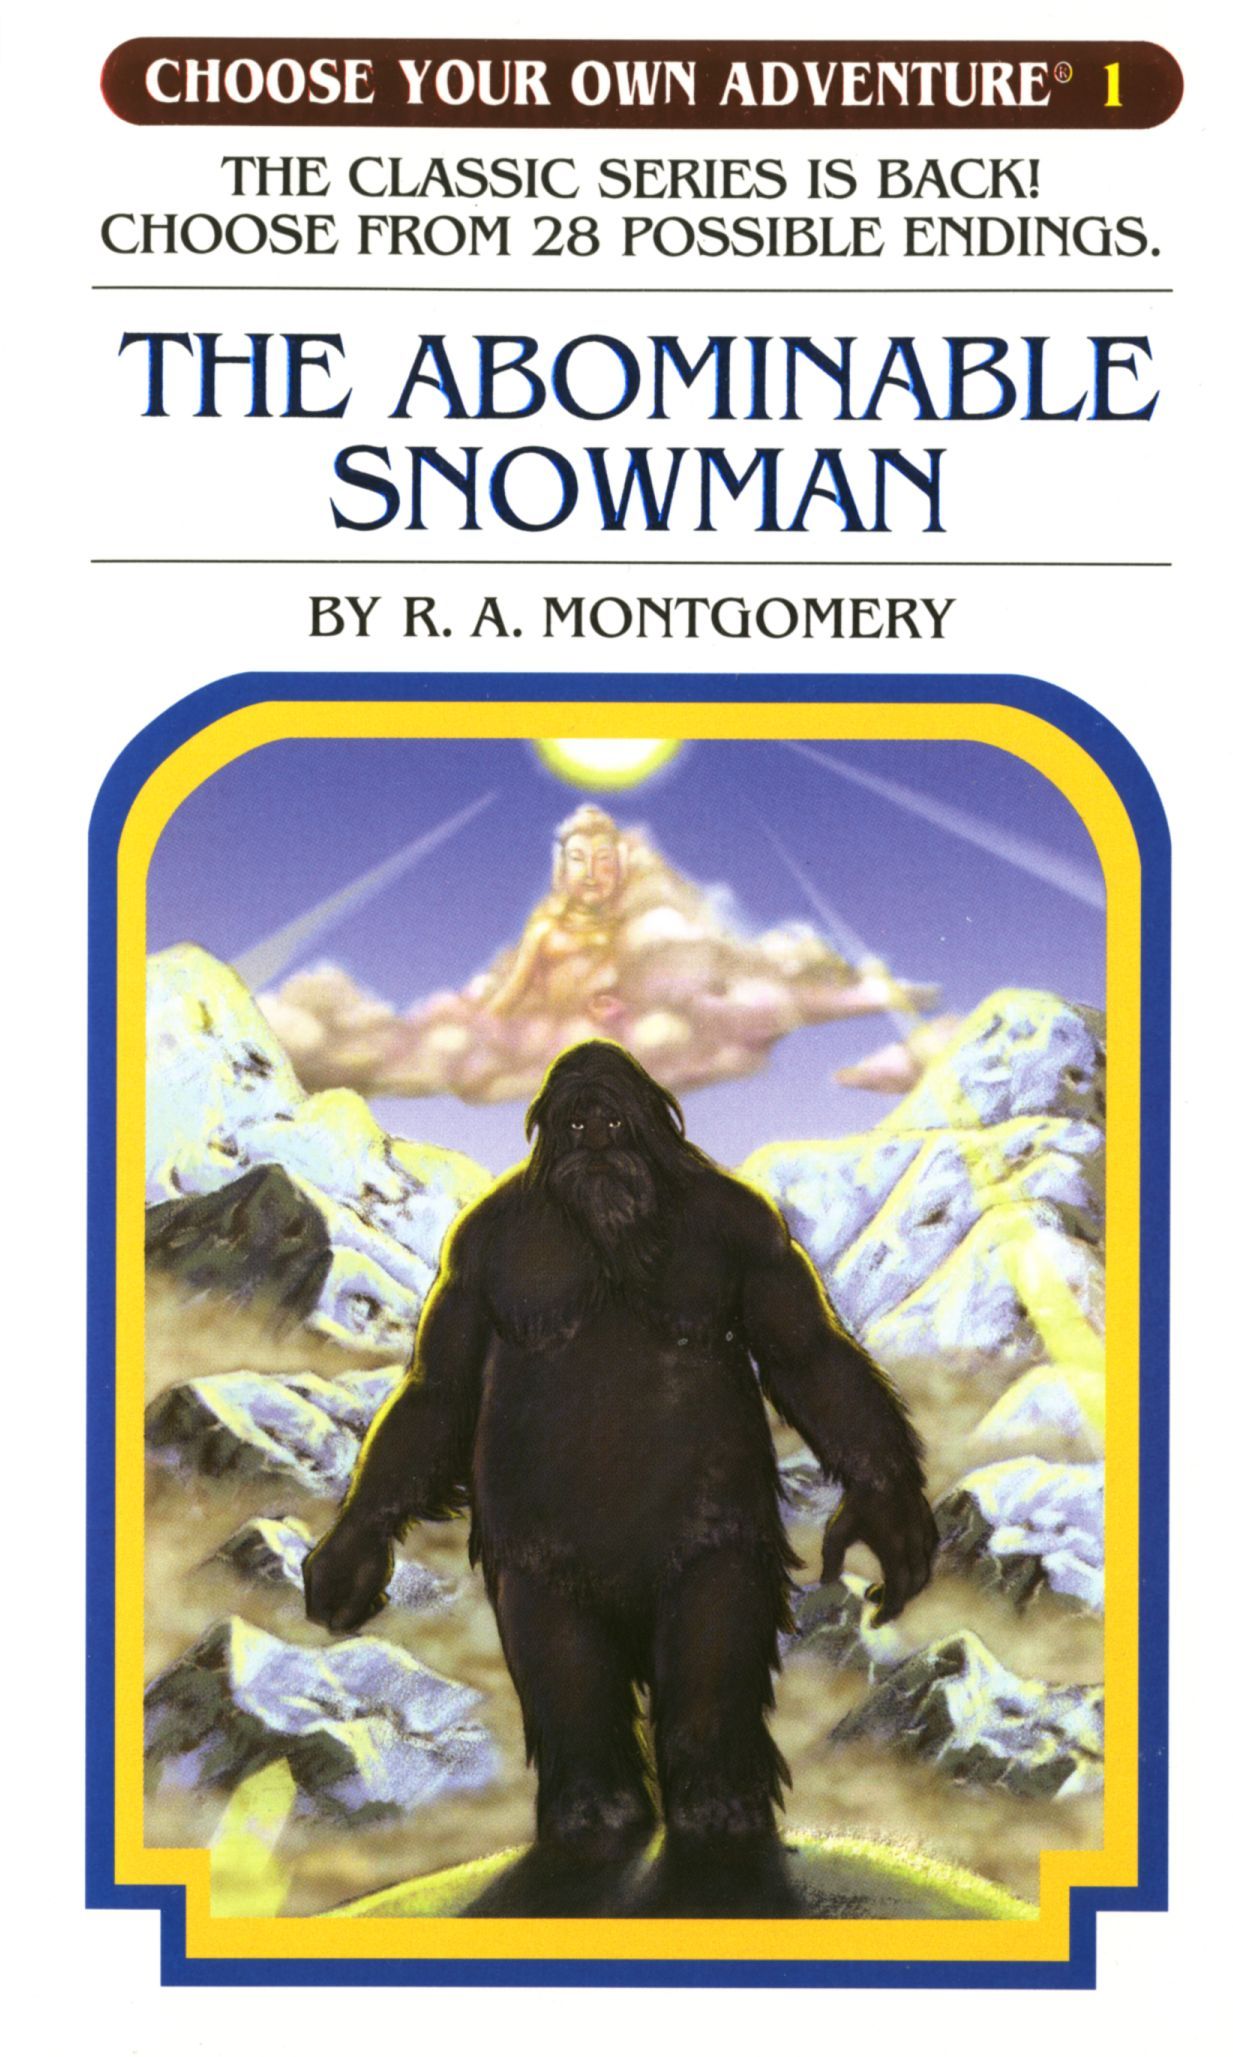 Abominable Snowman Choose Your Own Adventure original cover